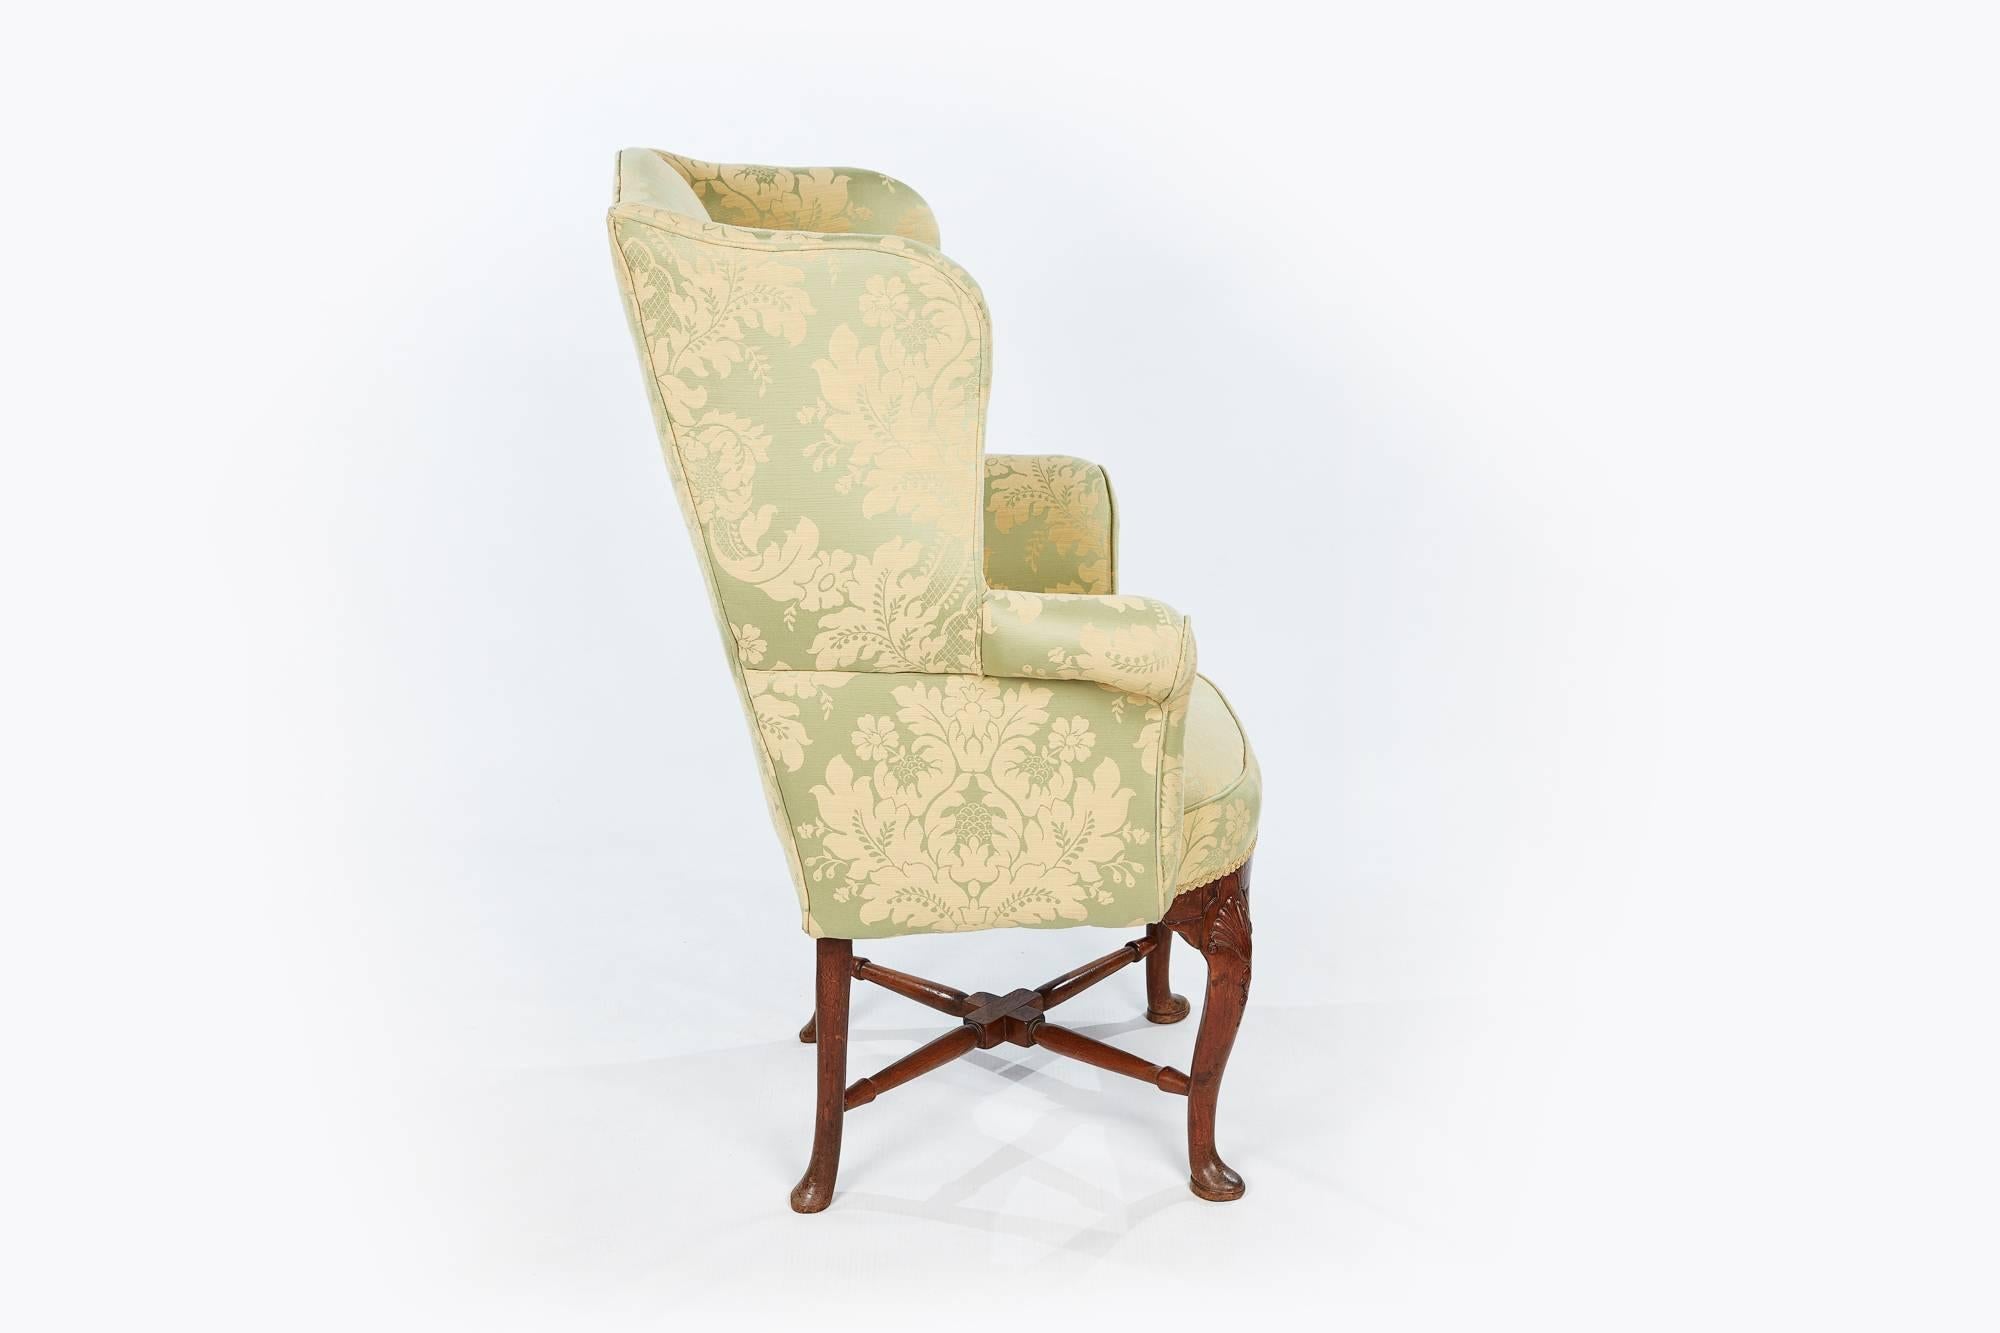 18th Century Mahogany Fully Upholstered Wing Chair In Excellent Condition For Sale In Dublin 8, IE